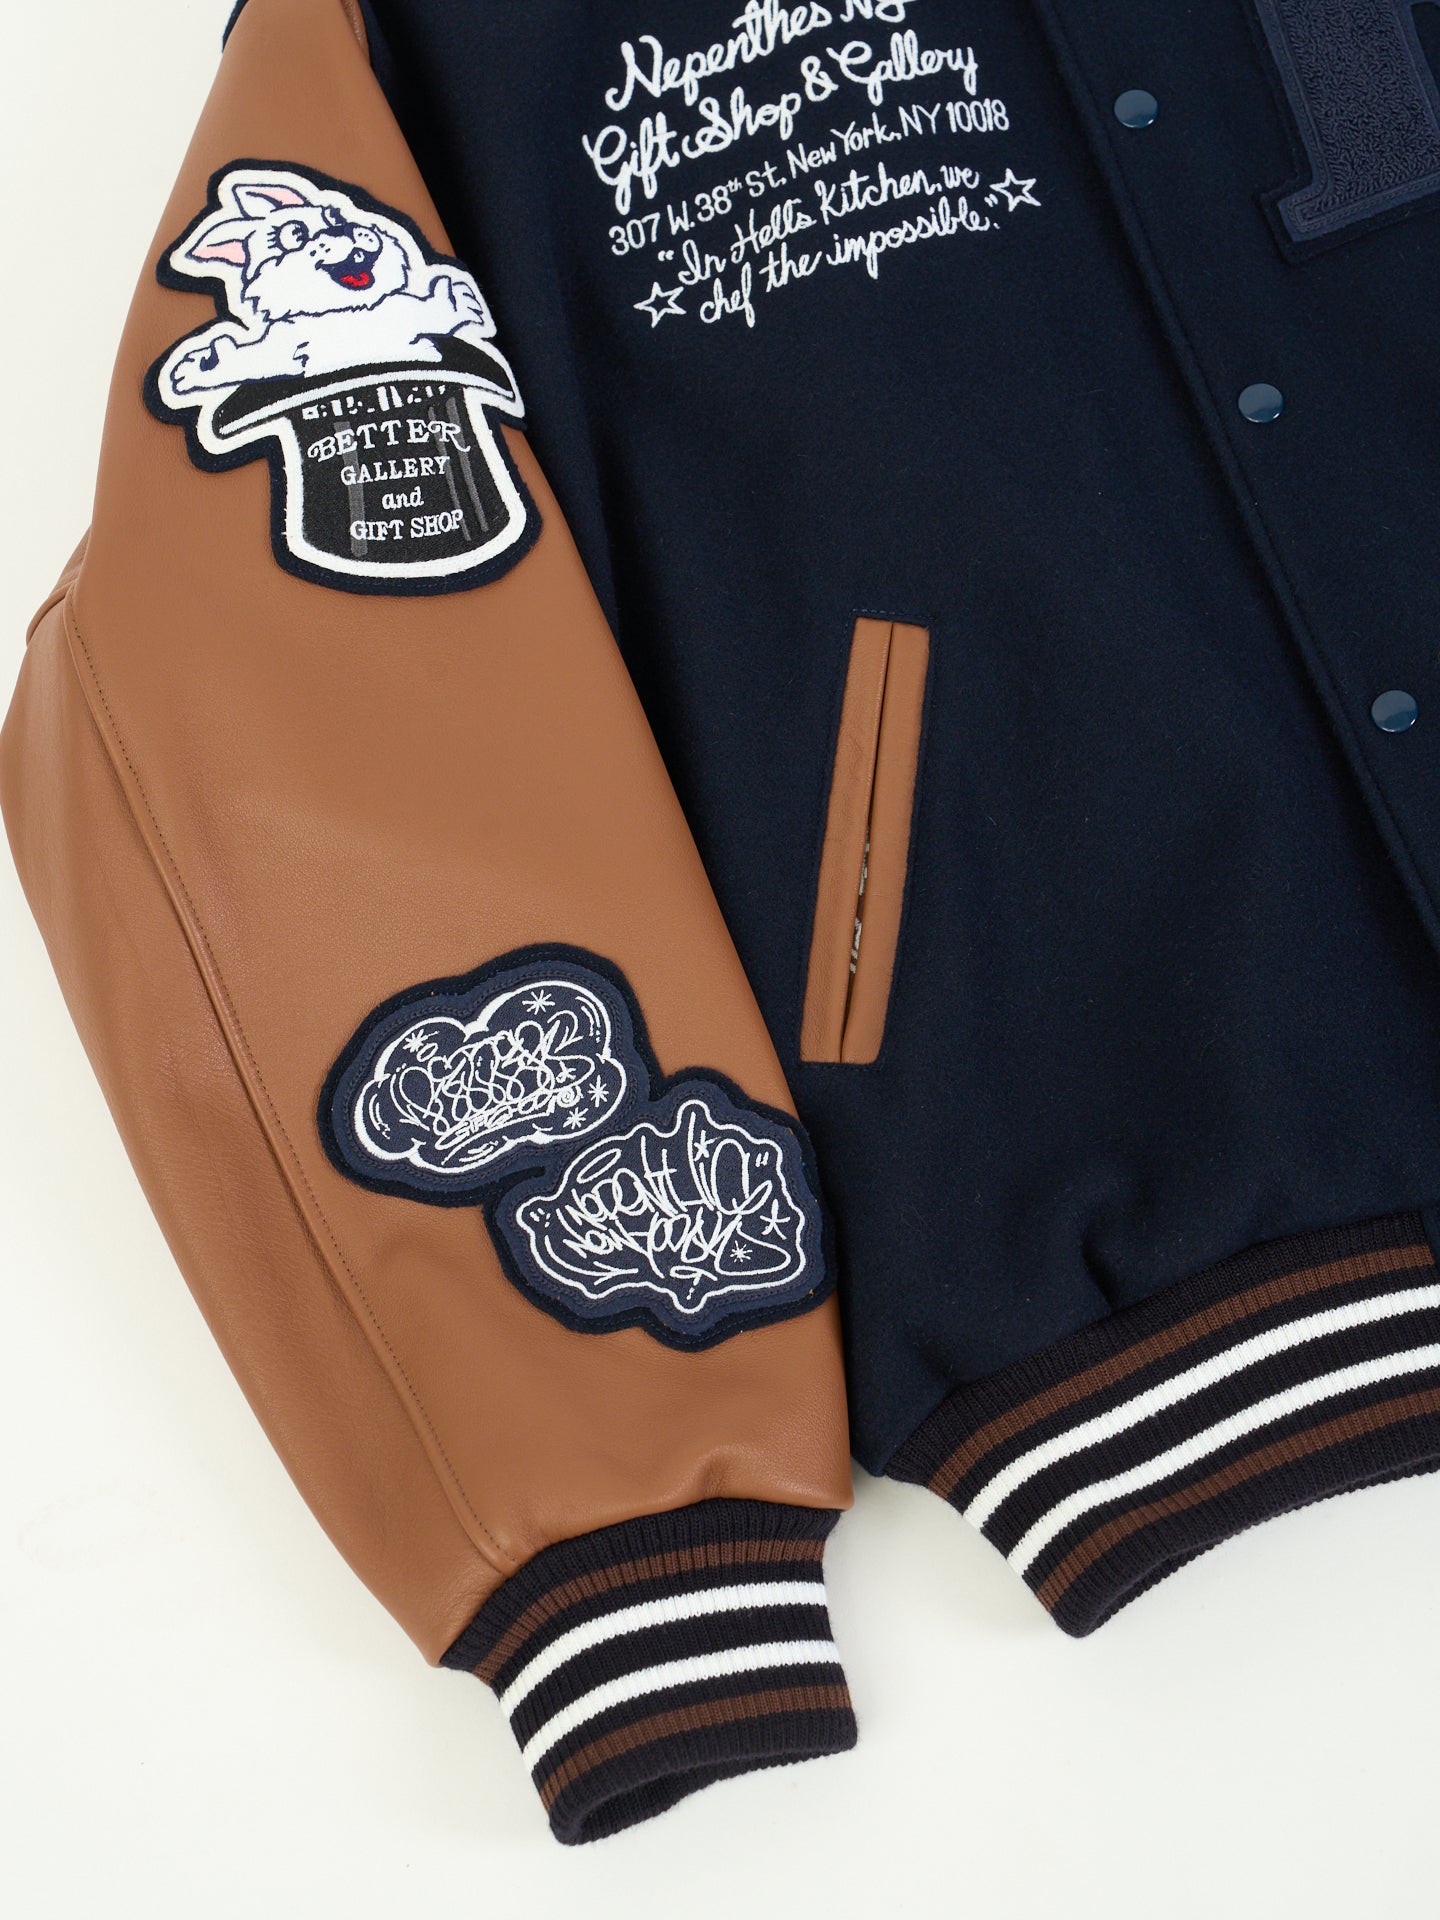 NNY x Better Gift Shop - Roots Leather Varsity Jacket